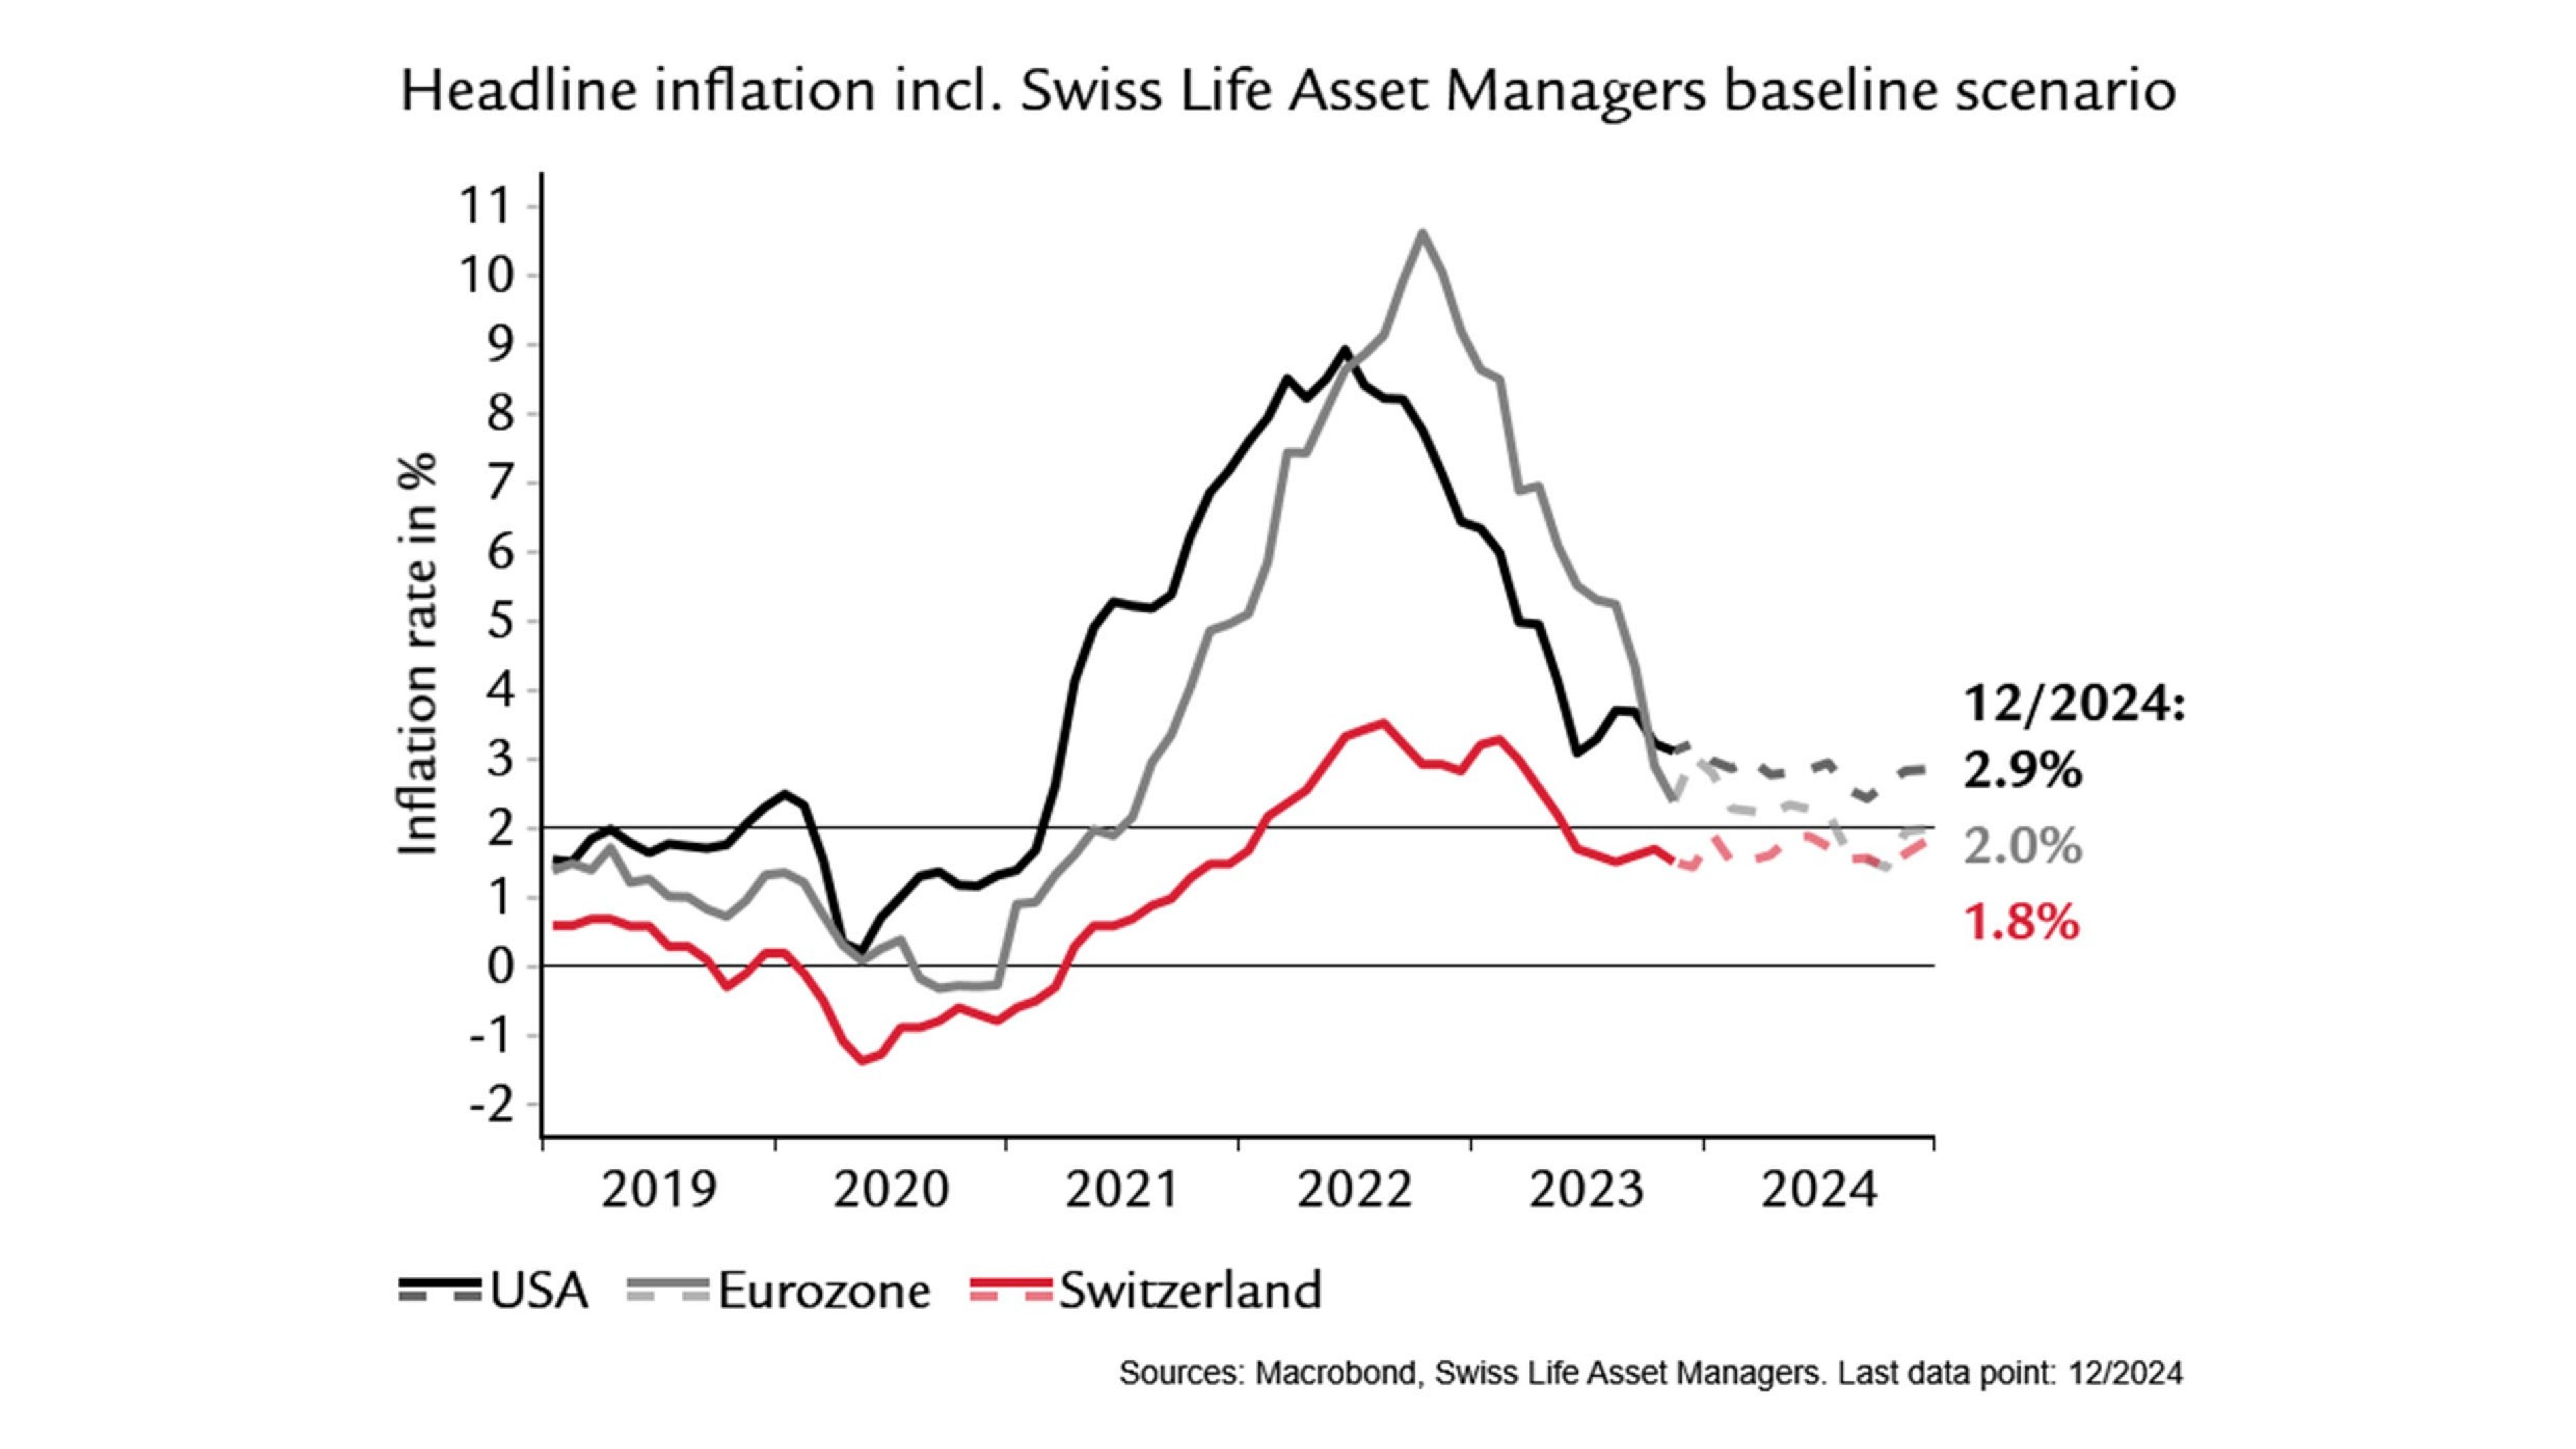 Graphic shows headline Inflation incl. Swiss Life Asset Managers baseline scenario